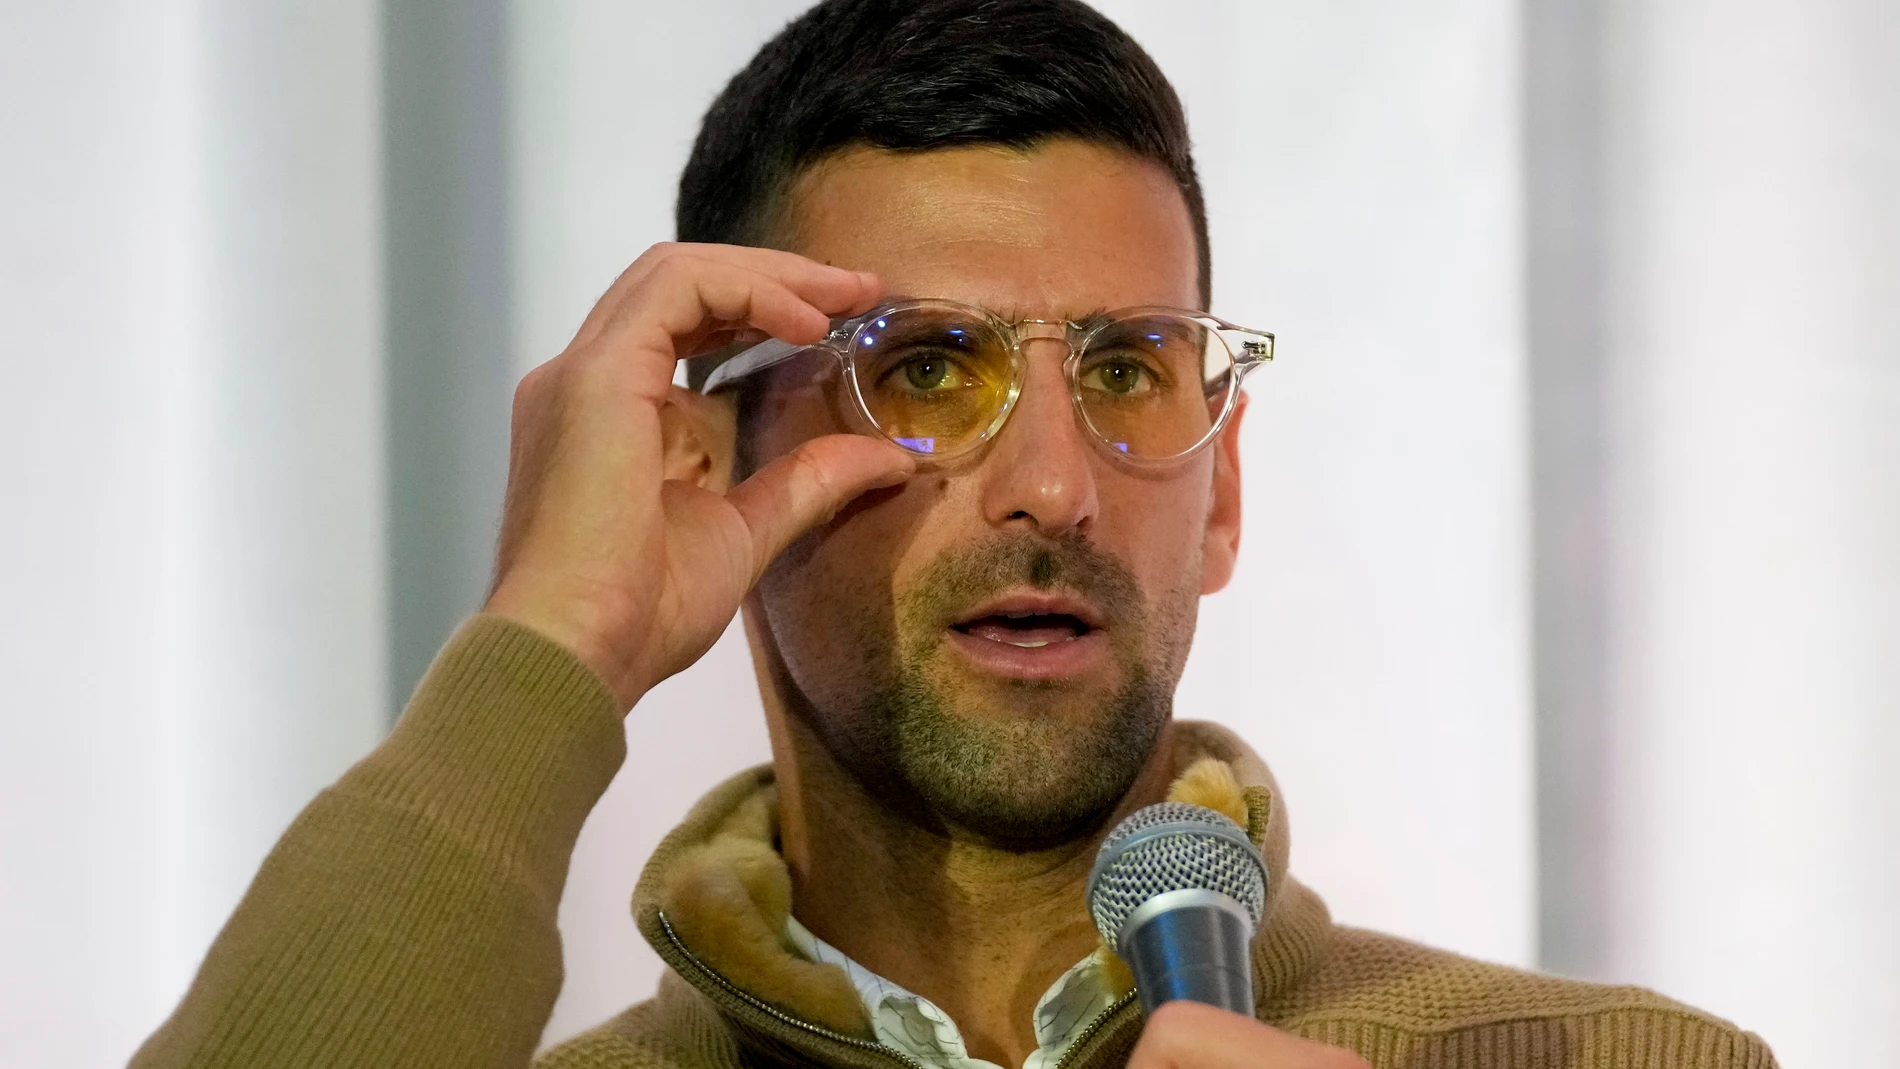 Serbian tennis player Novak Djokovic speaks to the media after the screening of the documentary film about Croatian tennis legend Niki Pilic, former tennis player and former trainer of Novak Djokovic, Boris Becker and Goran Ivanisevic, in Belgrade, Serbia, Thursday, March 28, 2024. Top-ranked Novak Djokovic has split with coach Goran Ivanisevic, ending their association that began in 2018 and included 12 Grand Slam titles for the Serbian tennis player. (AP Photo/Darko Vojinovic)